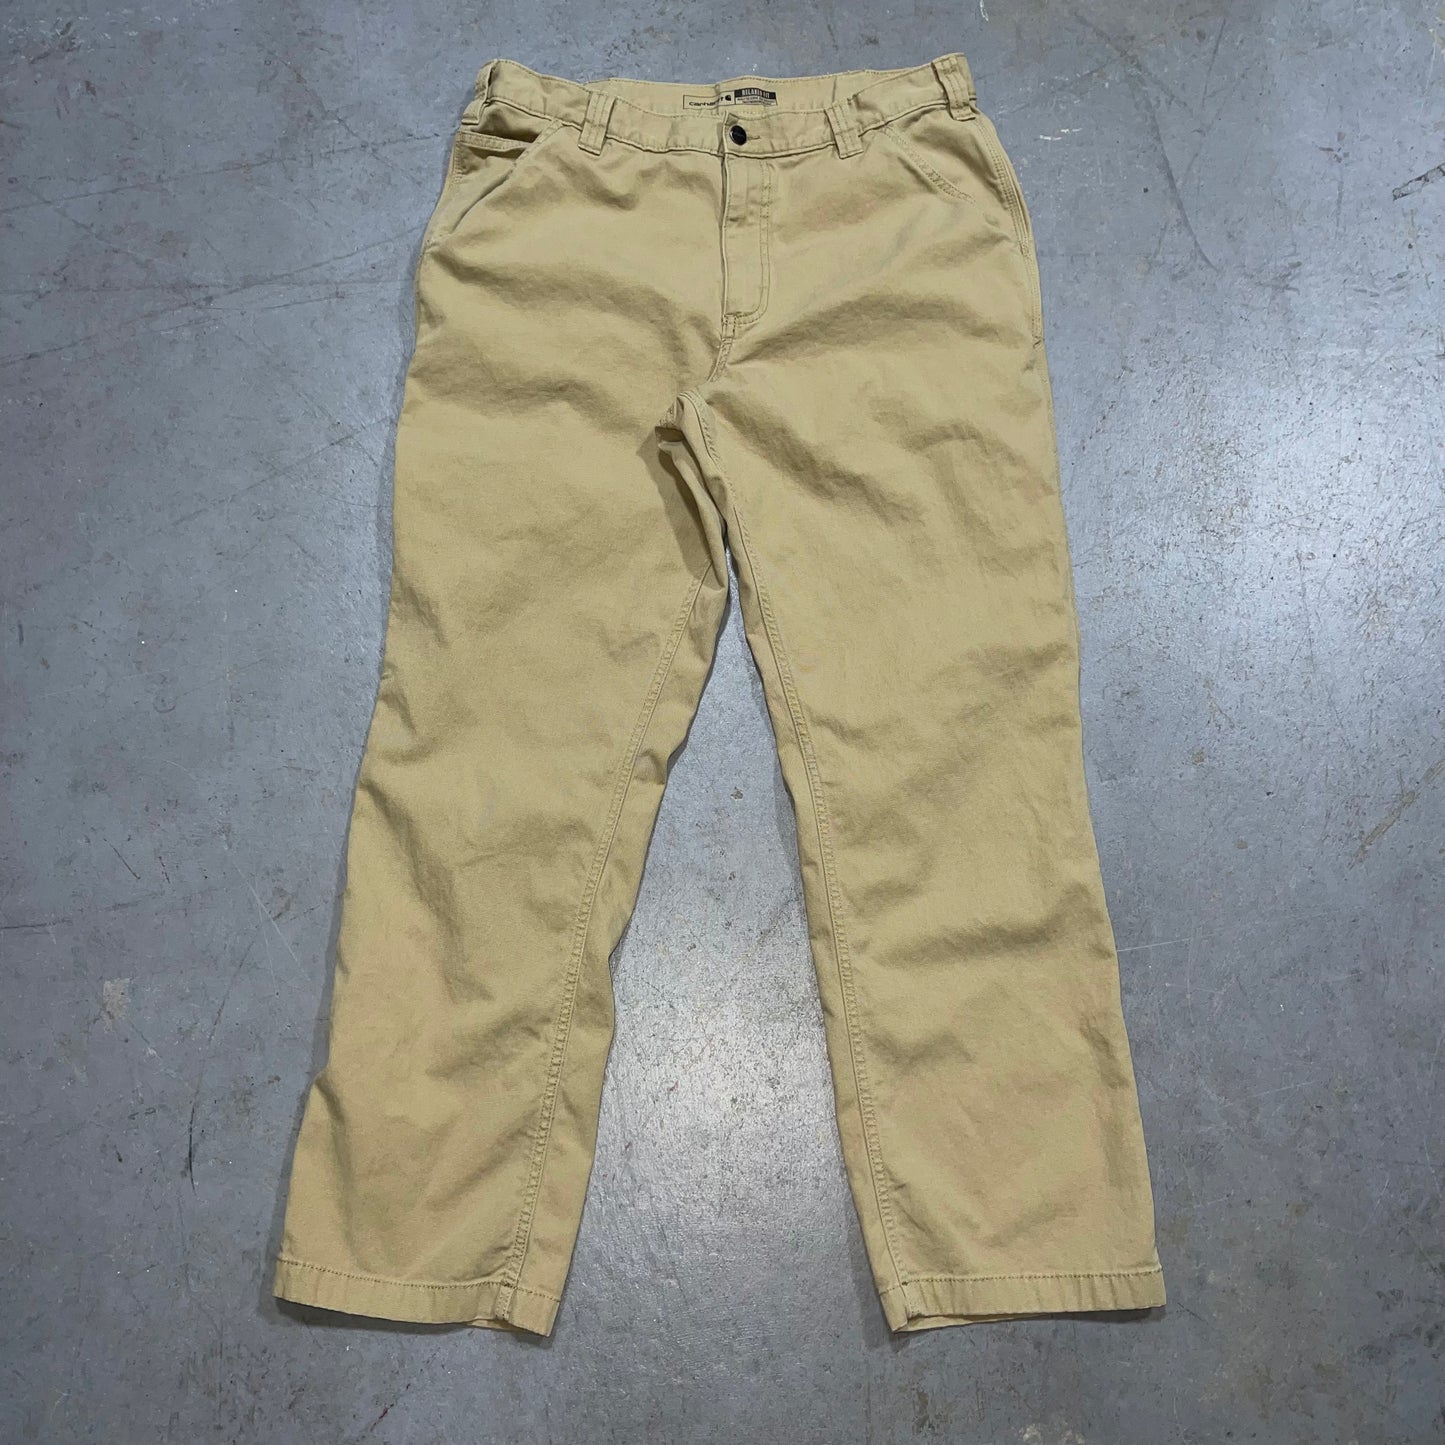 Carhartt Rugged Flex Relaxed Fit Canvas Work Pant. Size 36x32